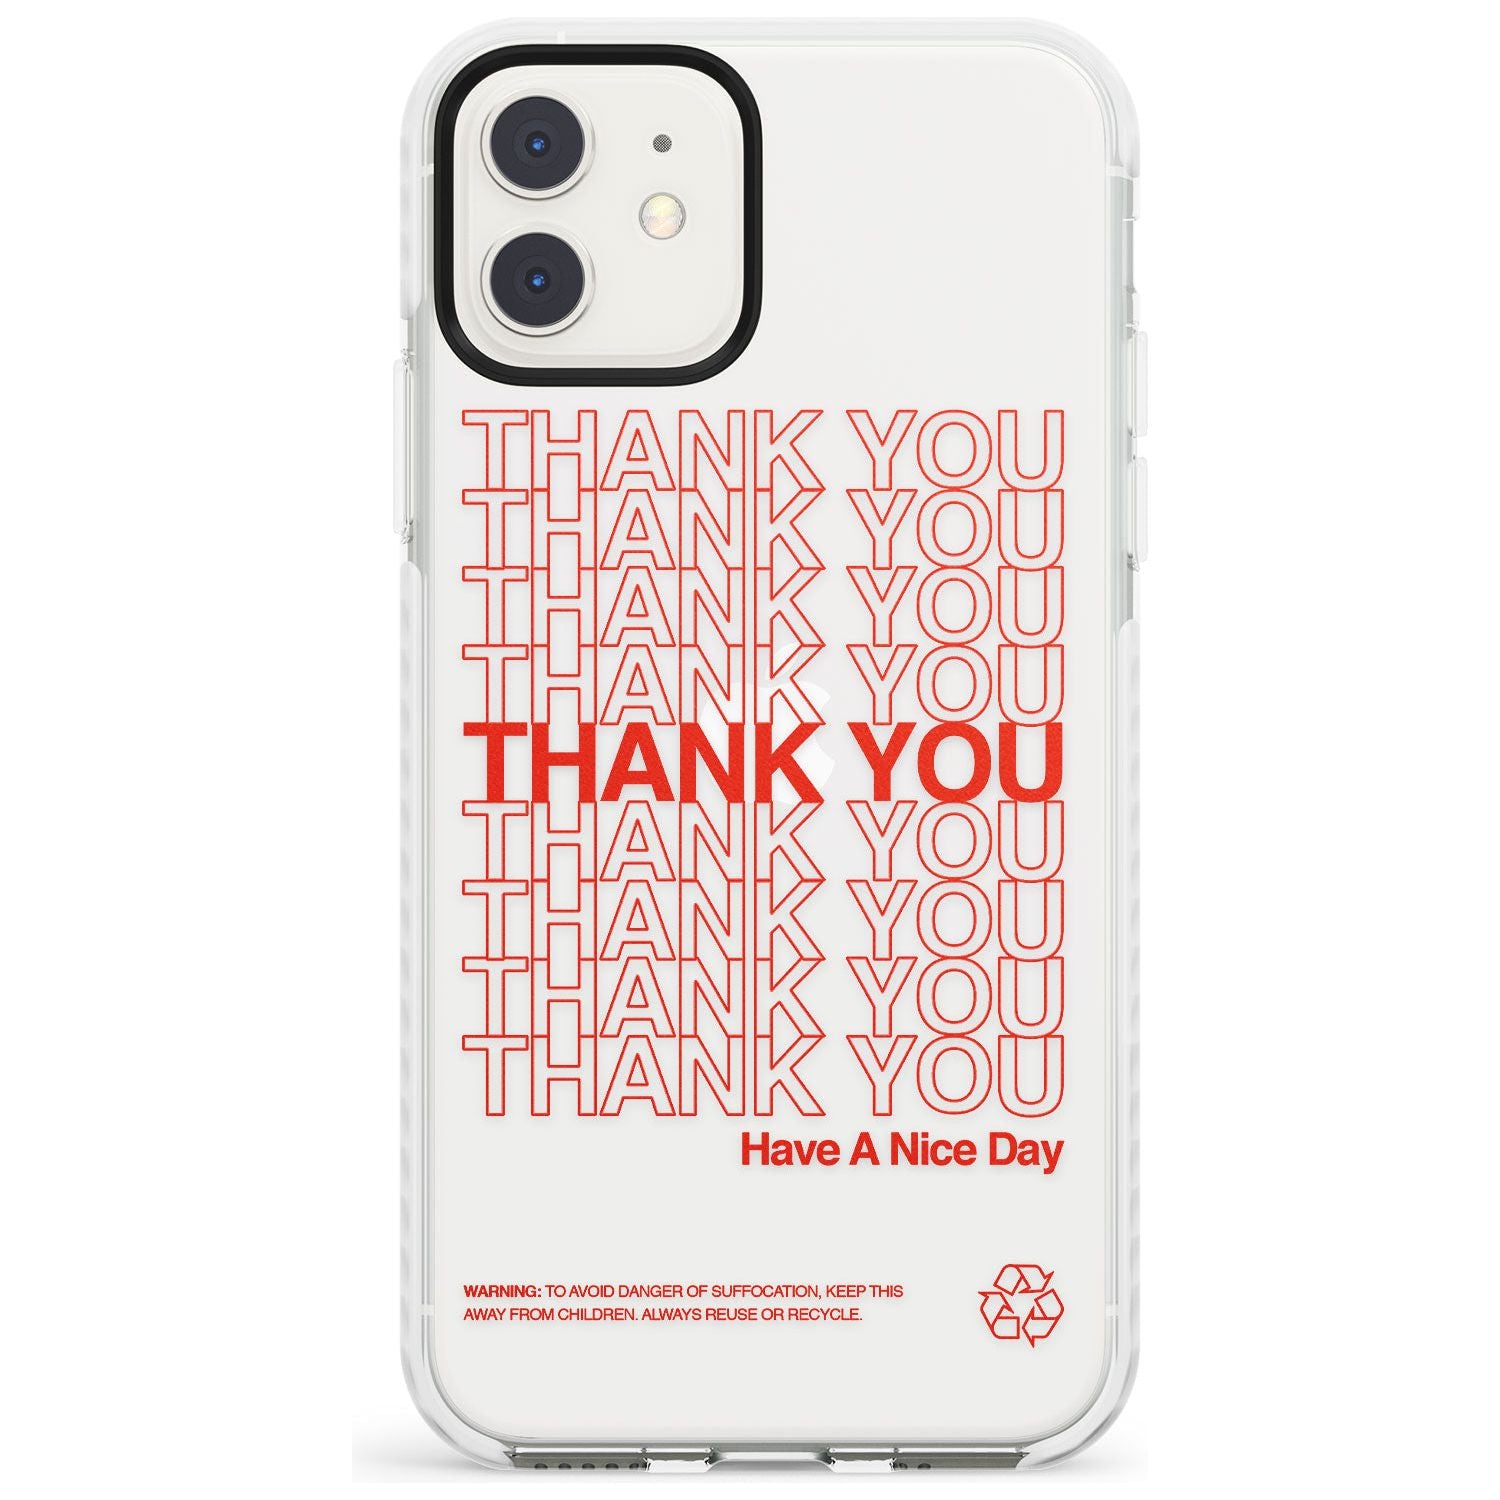 Classic Thank You Bag Design: Solid White + Red Impact Phone Case for iPhone 11